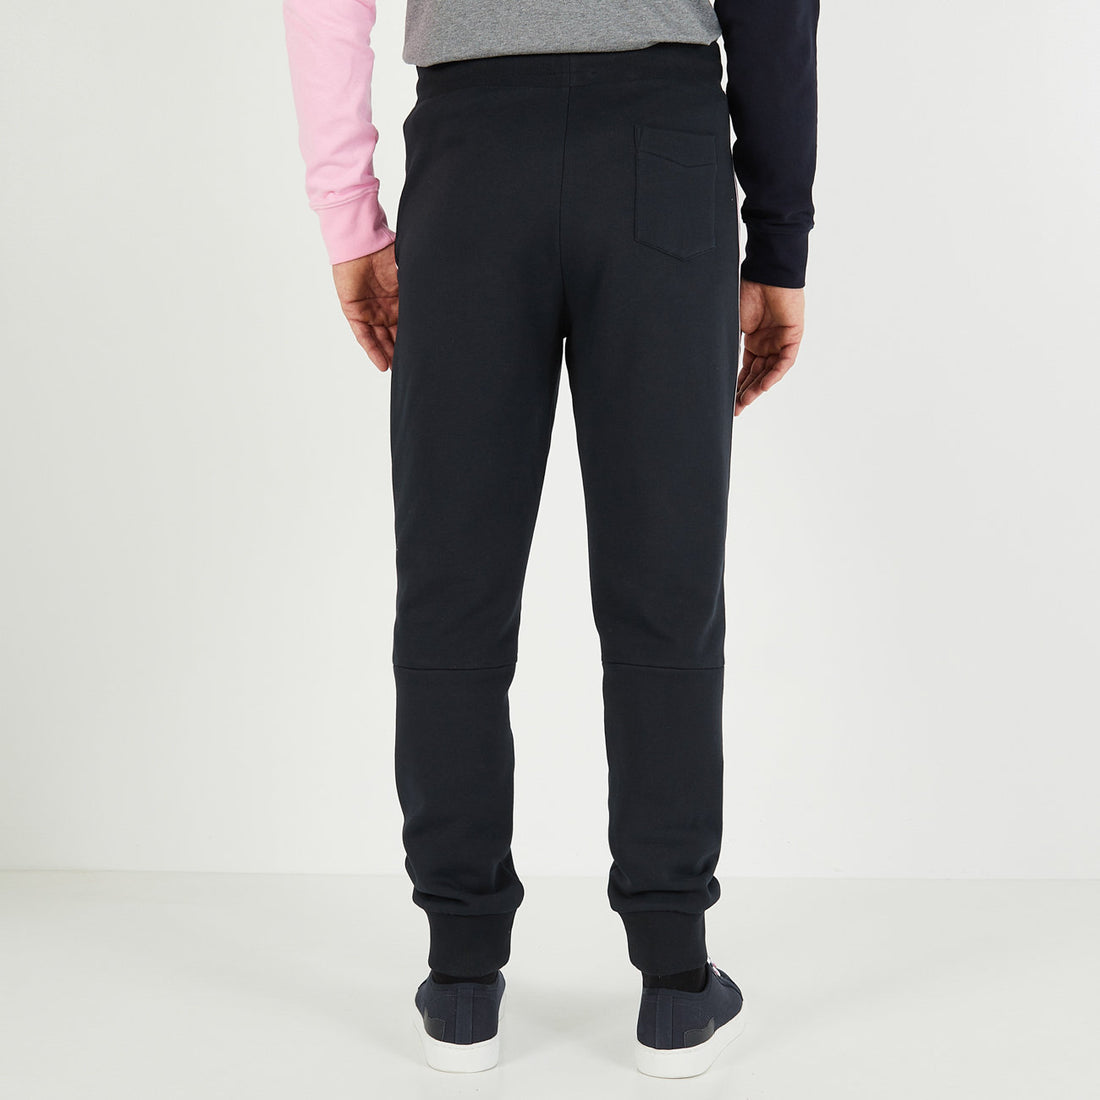 Dark Blue Jogging Bottoms With Contrasting Lateral Stripes_H23MAIJO0006_BLF_02